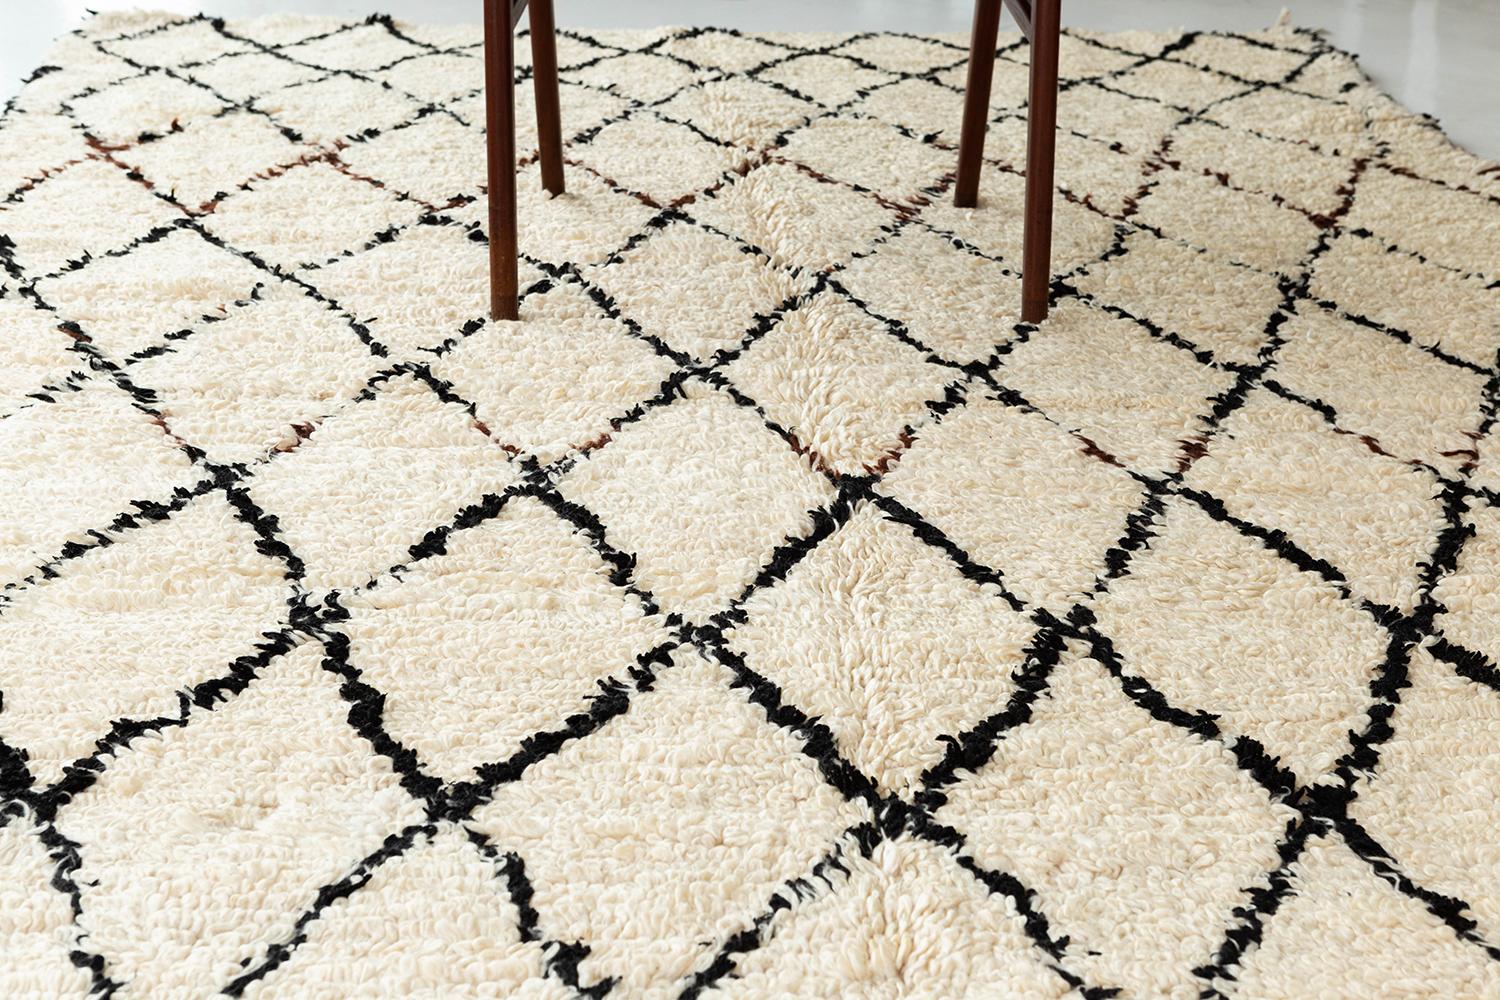 A vintage Beni Ourain tribe Moroccan in ivory with black asymmetrical lines creating a repeating diamond pattern. This rug has a perfect handwoven shag texture and an overall unique design that will add character to any space. The singular colorful